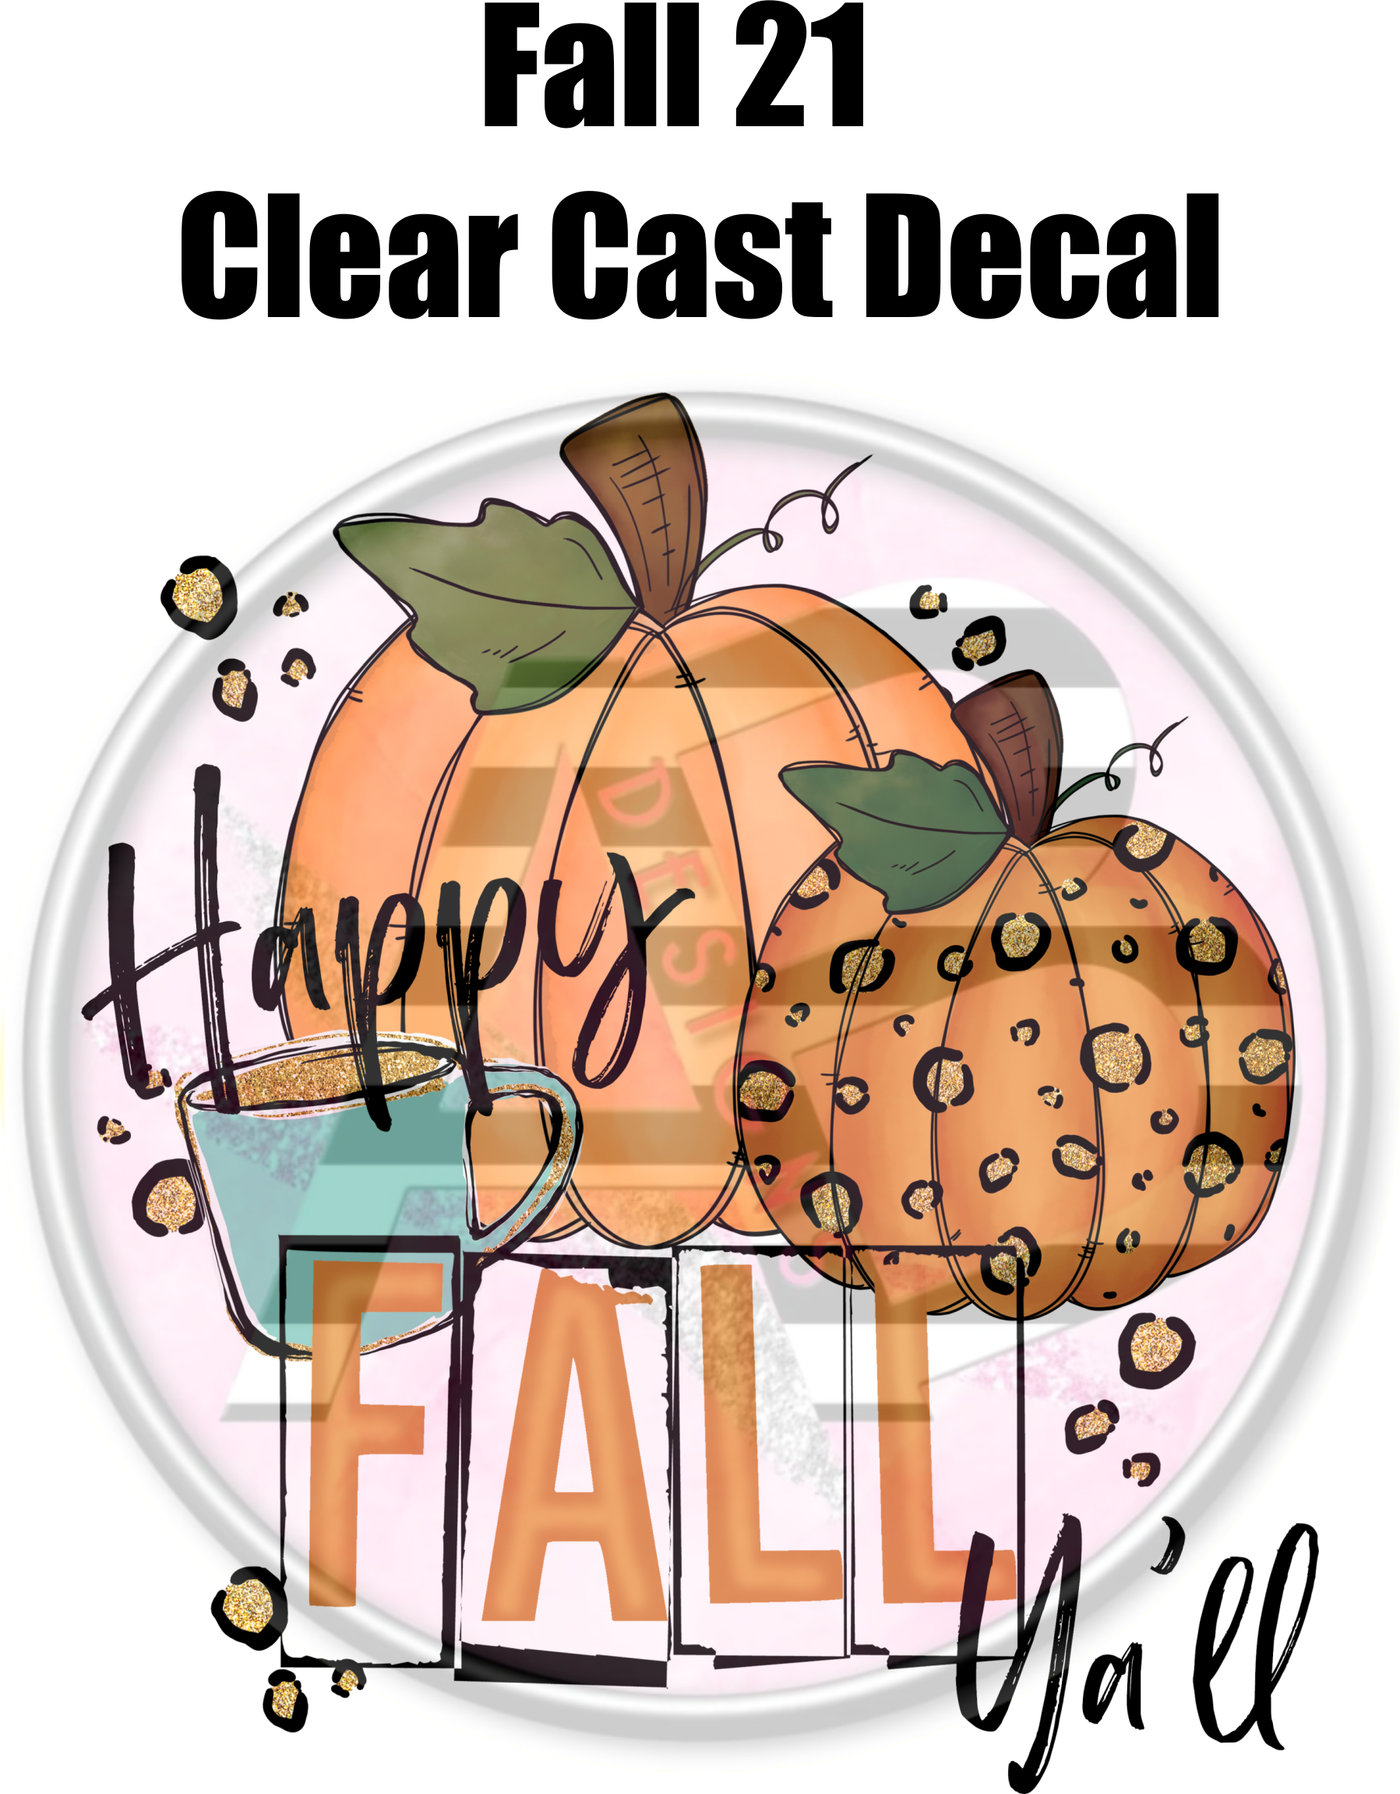 Fall 21 - Clear Cast Decal